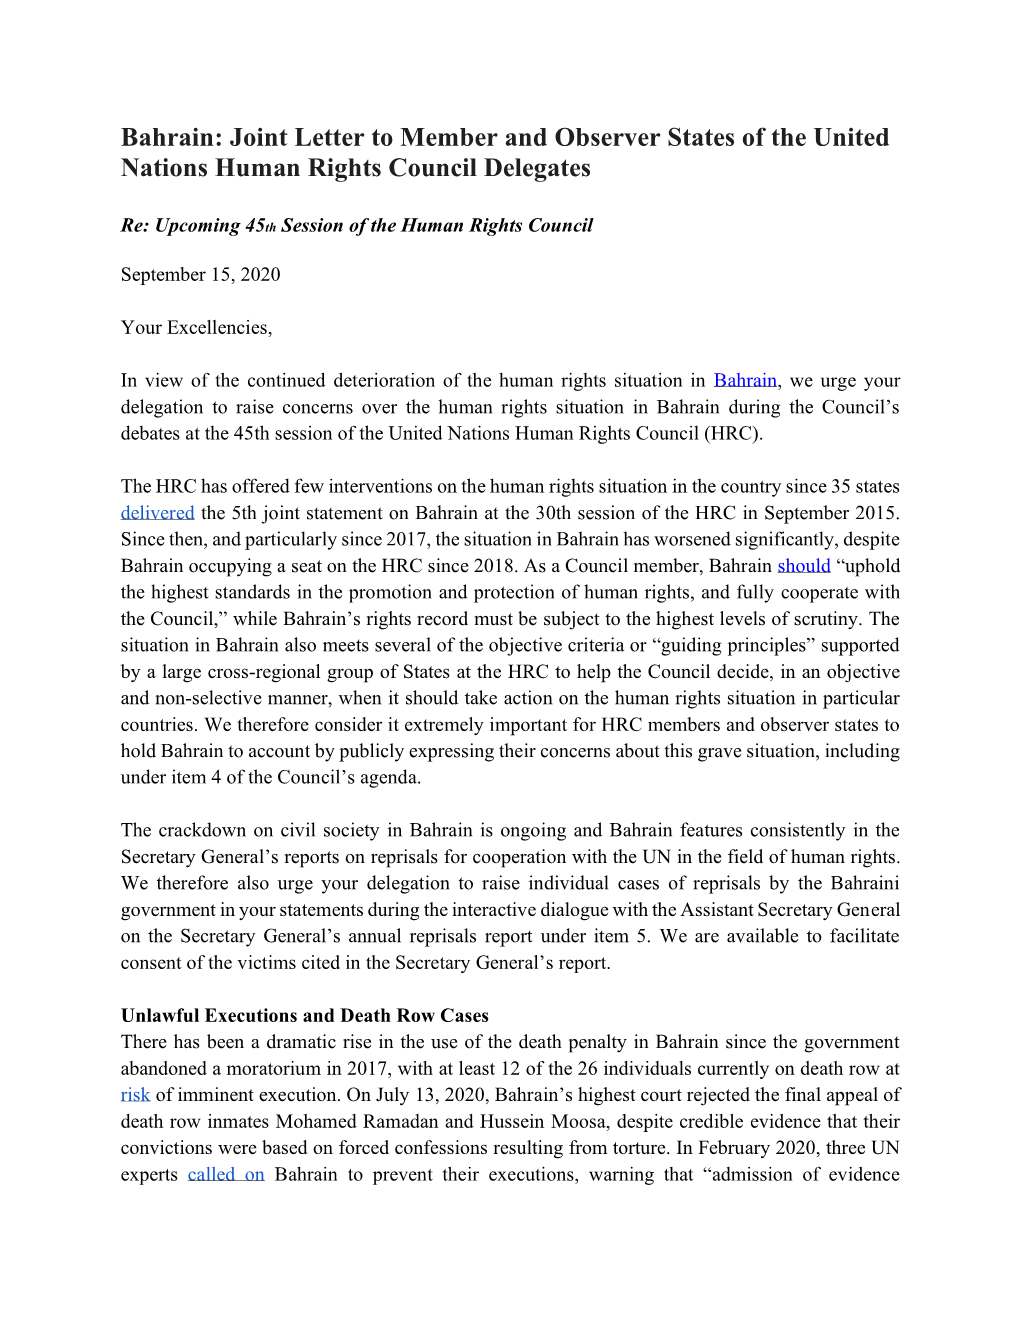 Bahrain: Joint Letter to Member and Observer States of the United Nations Human Rights Council Delegates